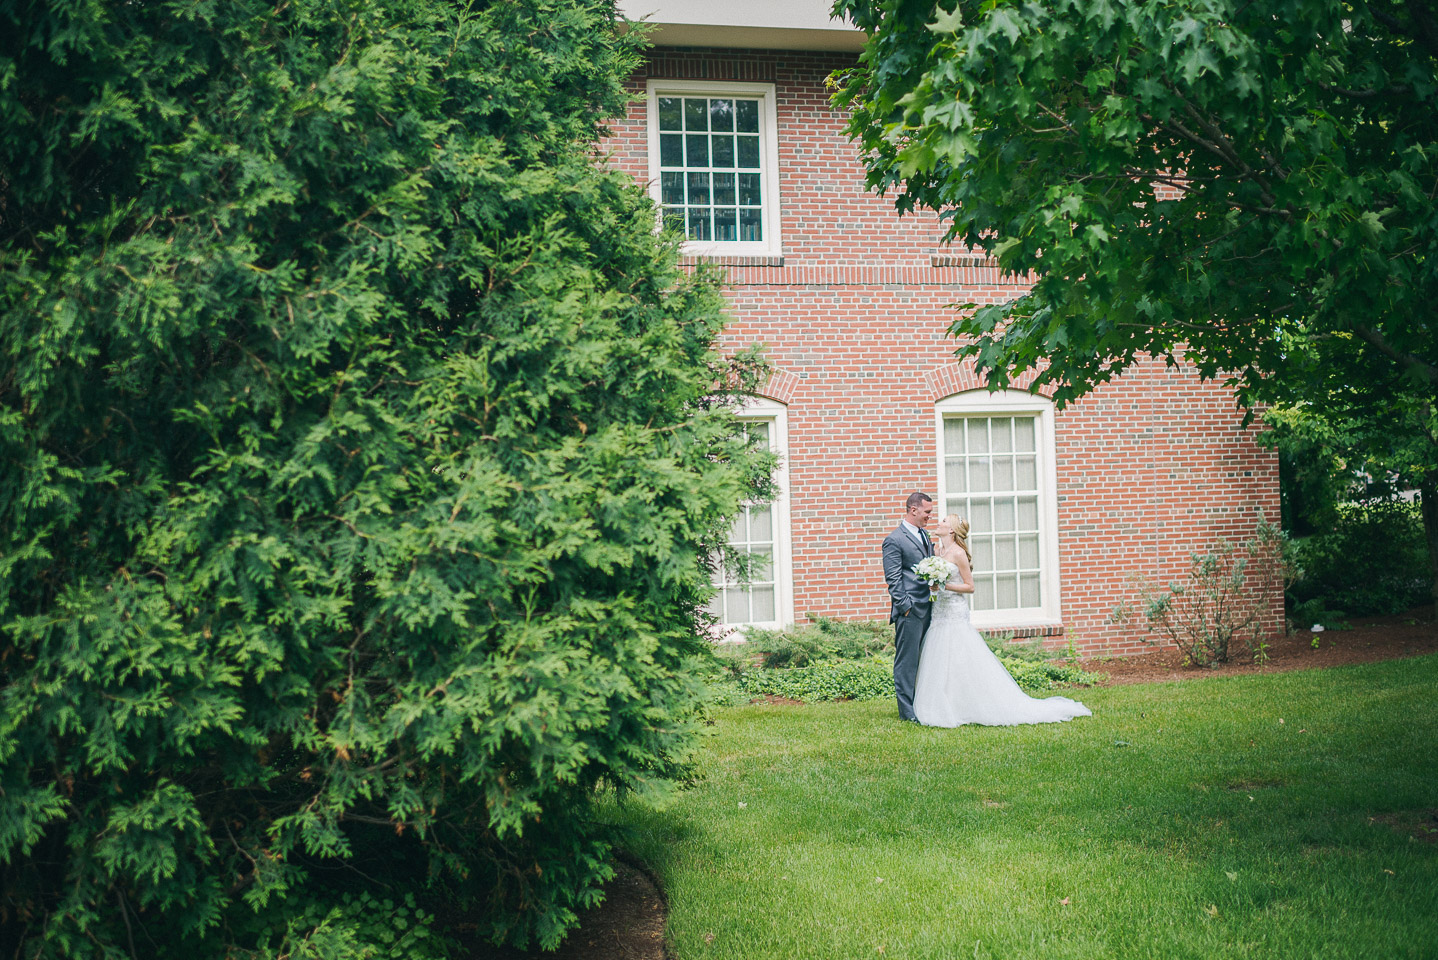 NH Wedding Photographer: couple in garden against old brick